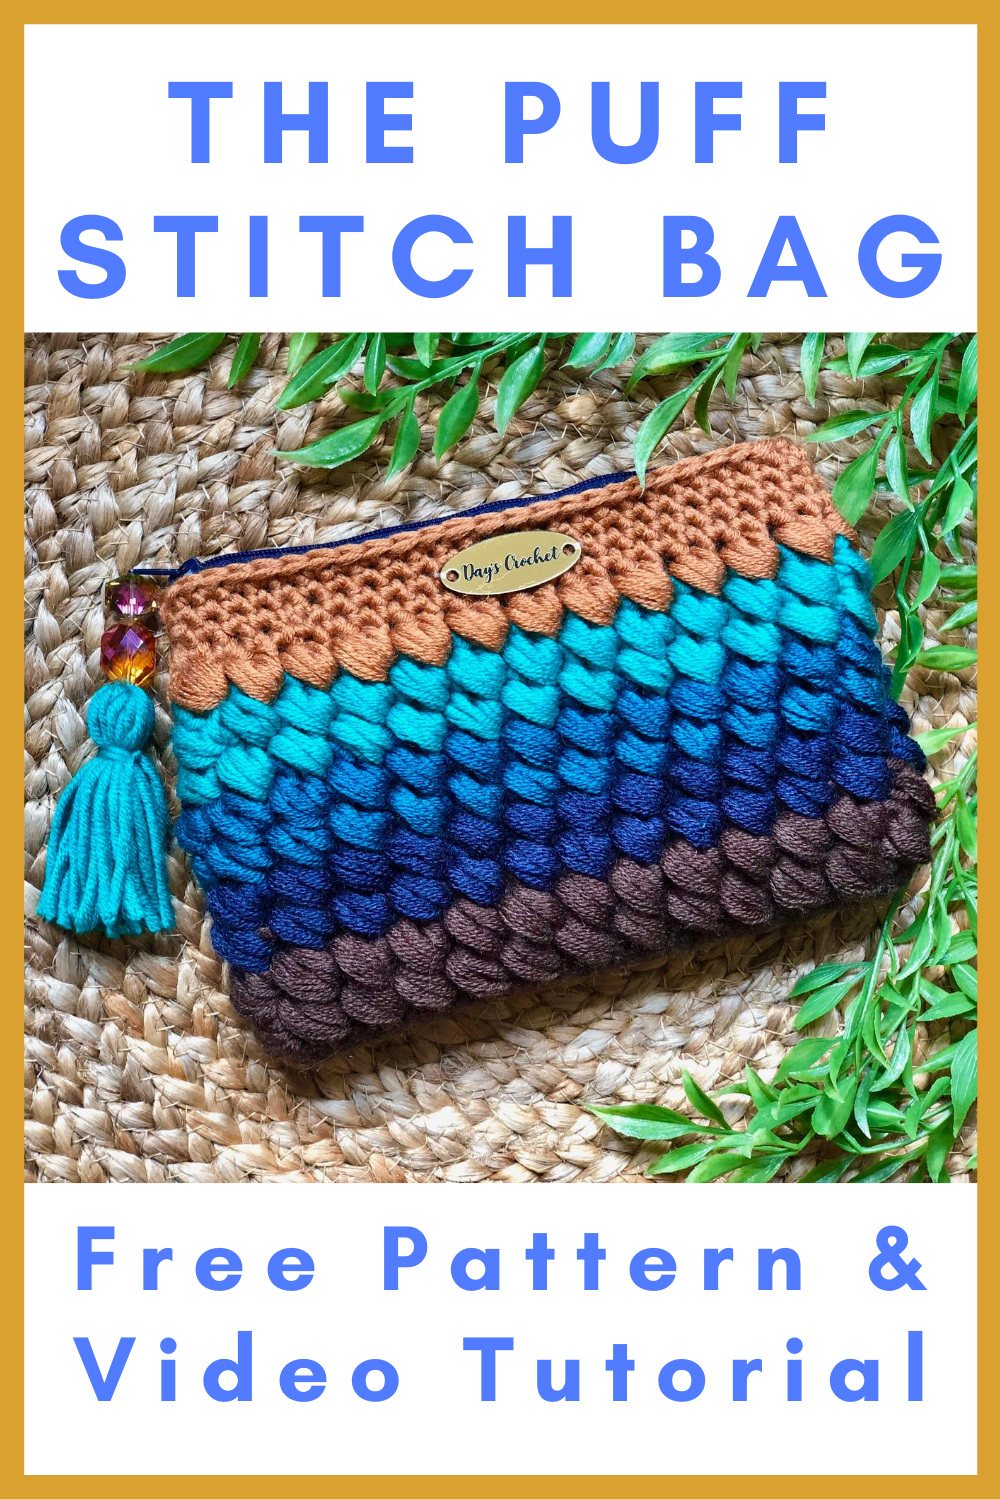 3 Crochet Bag Patterns Easy to Make - Smiling Colors